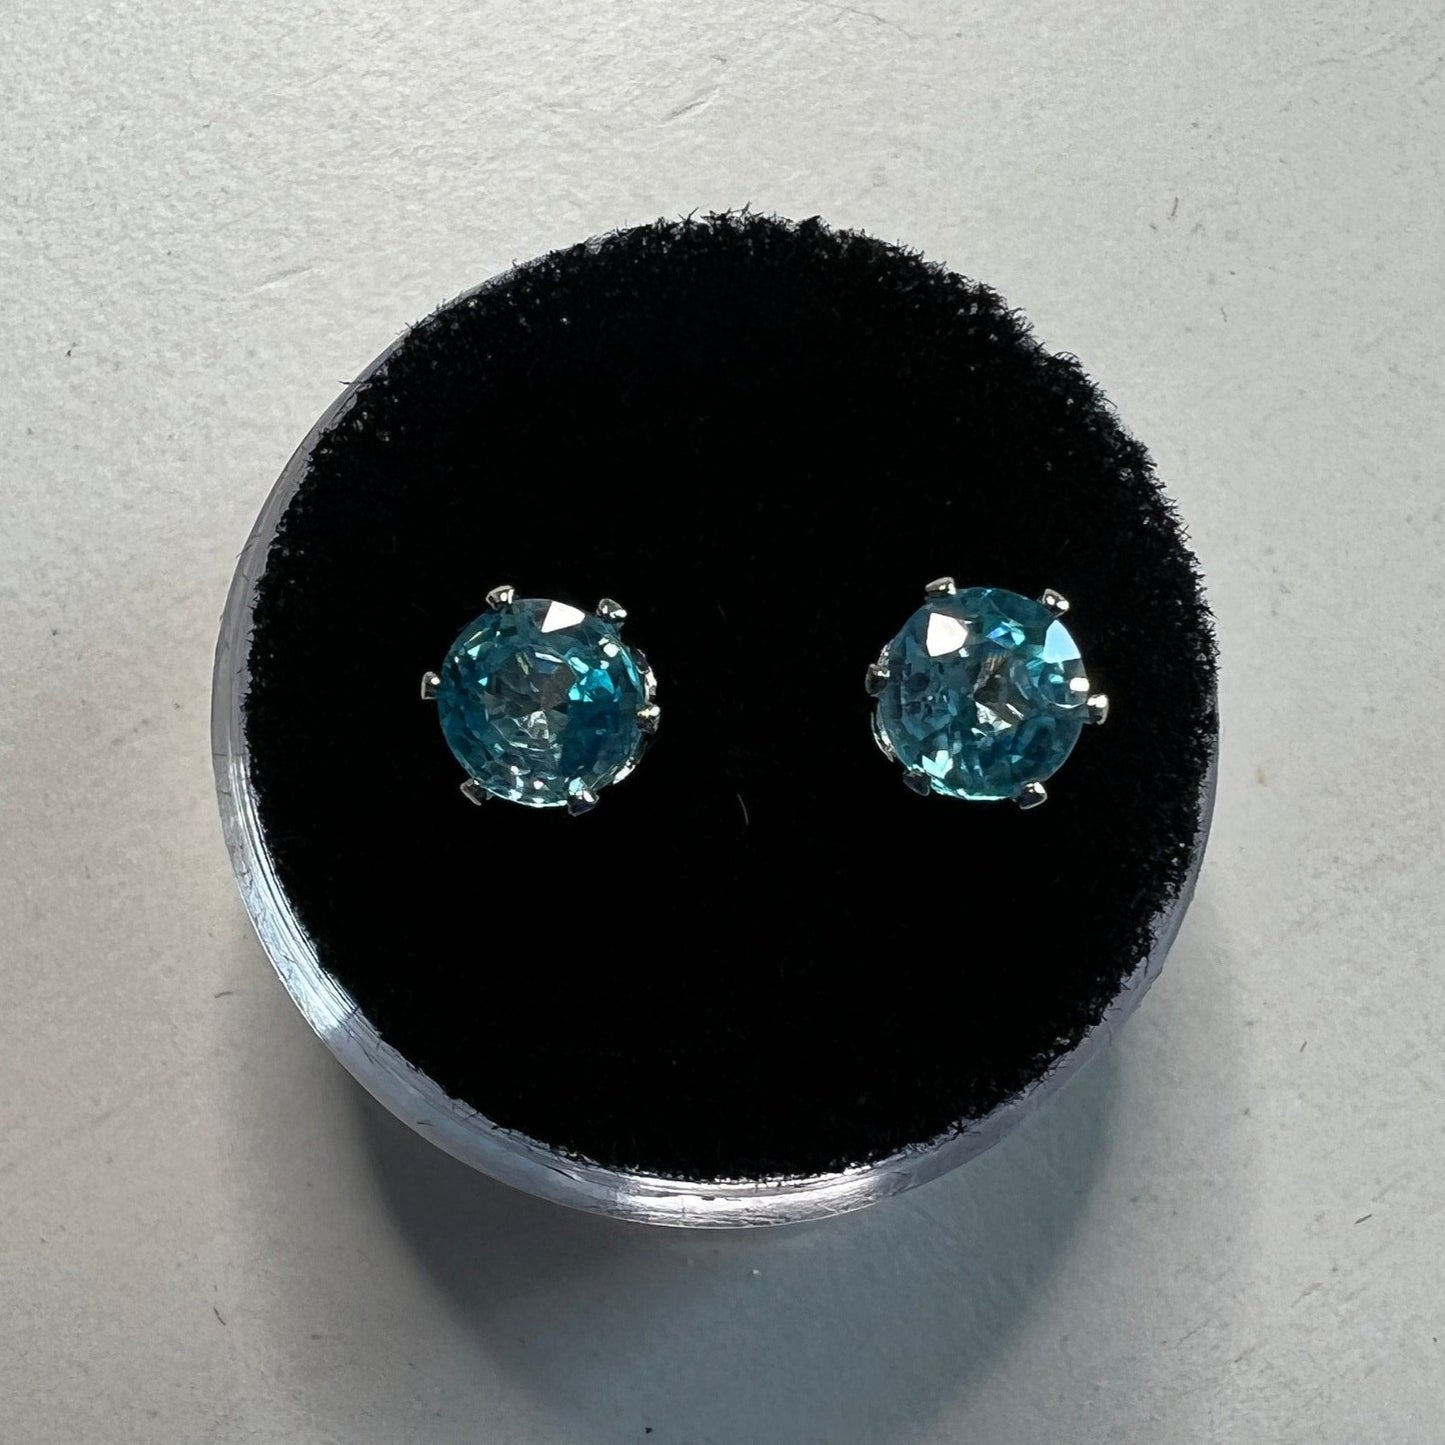 1.78 tow Cambodian Blue Zircon Earrings w/Stunning Sparkle and Color!